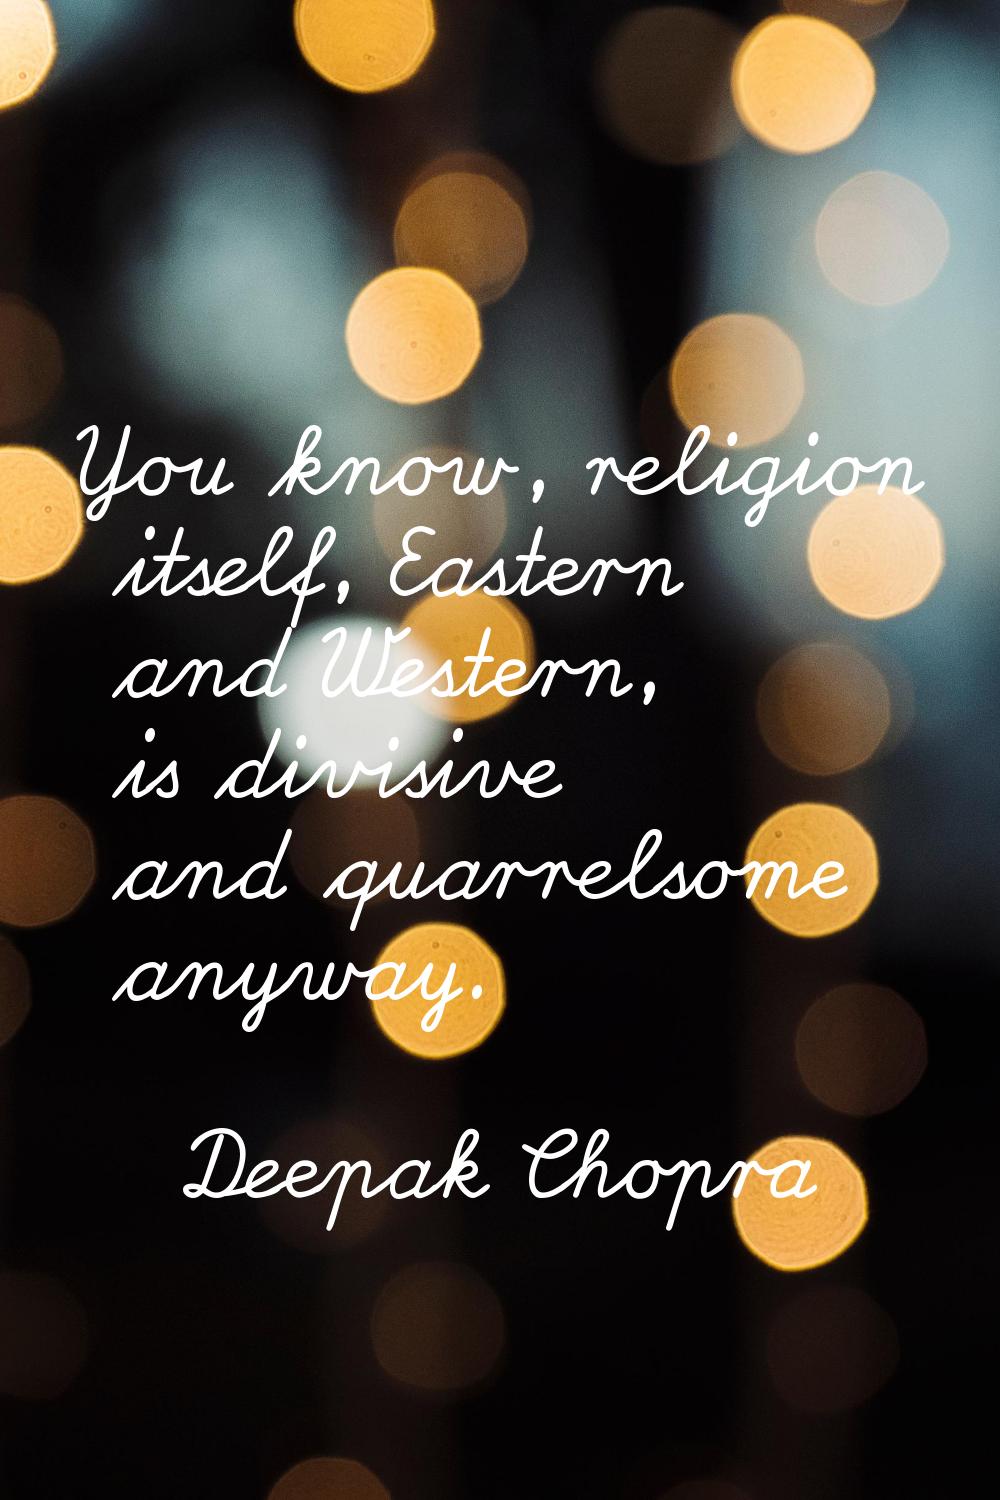 You know, religion itself, Eastern and Western, is divisive and quarrelsome anyway.